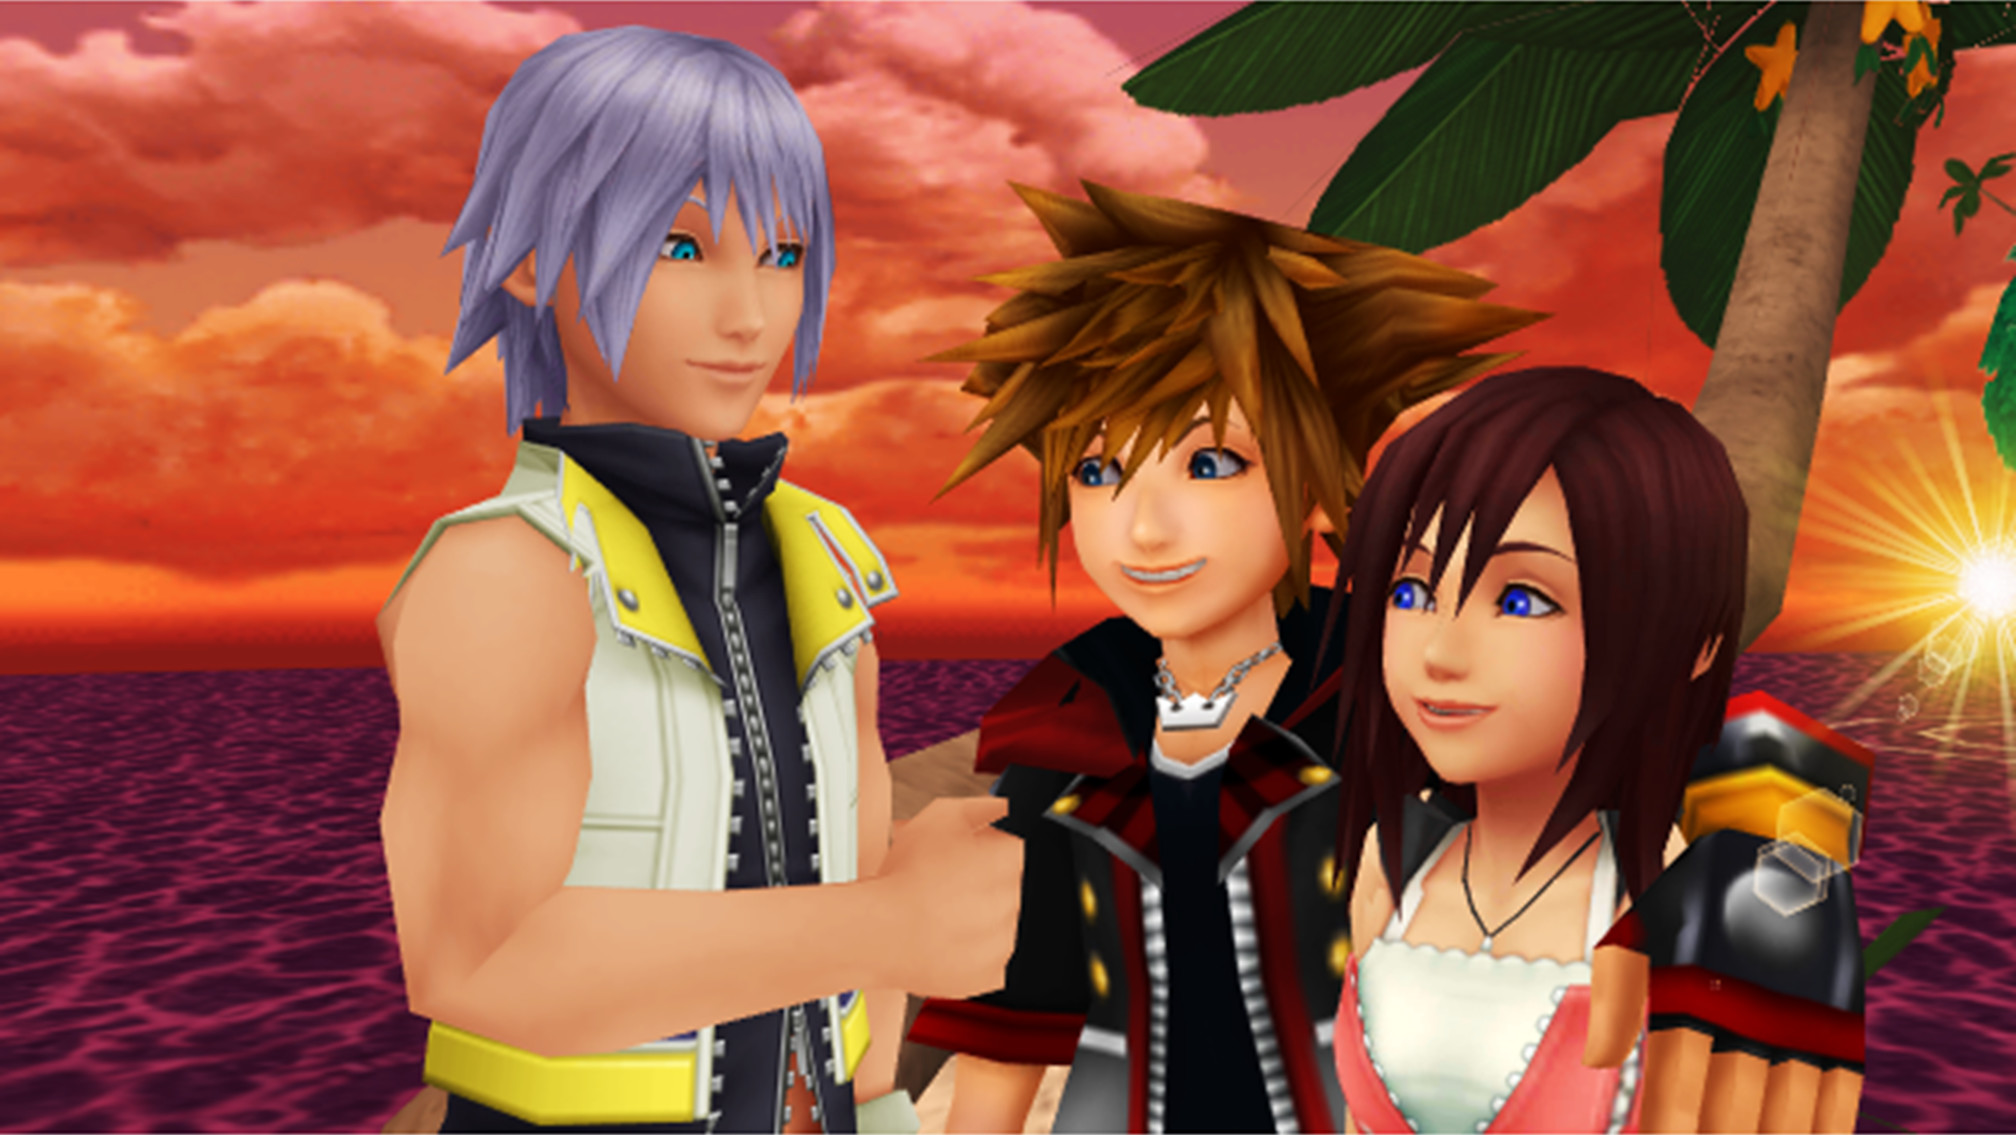 2016x1135 Kingdom Hearts trios images Sora Kairi and Riku are Best Freinds Forever.  HD wallpaper and background photos